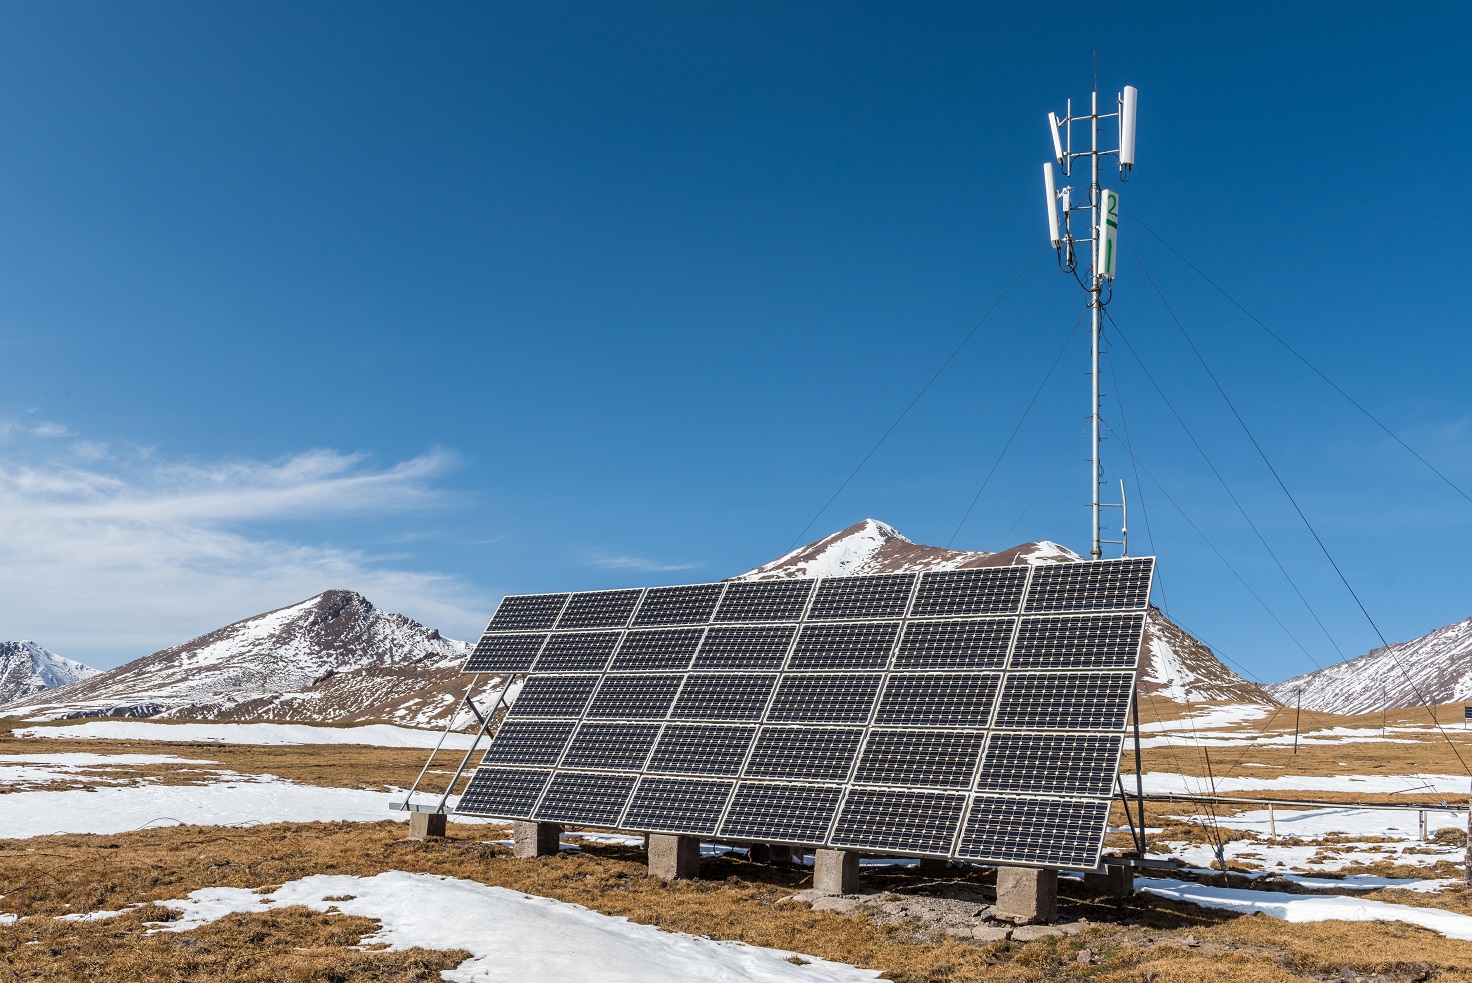 Small-scale Energy Production in Remote Areas relies on Ni-Cd